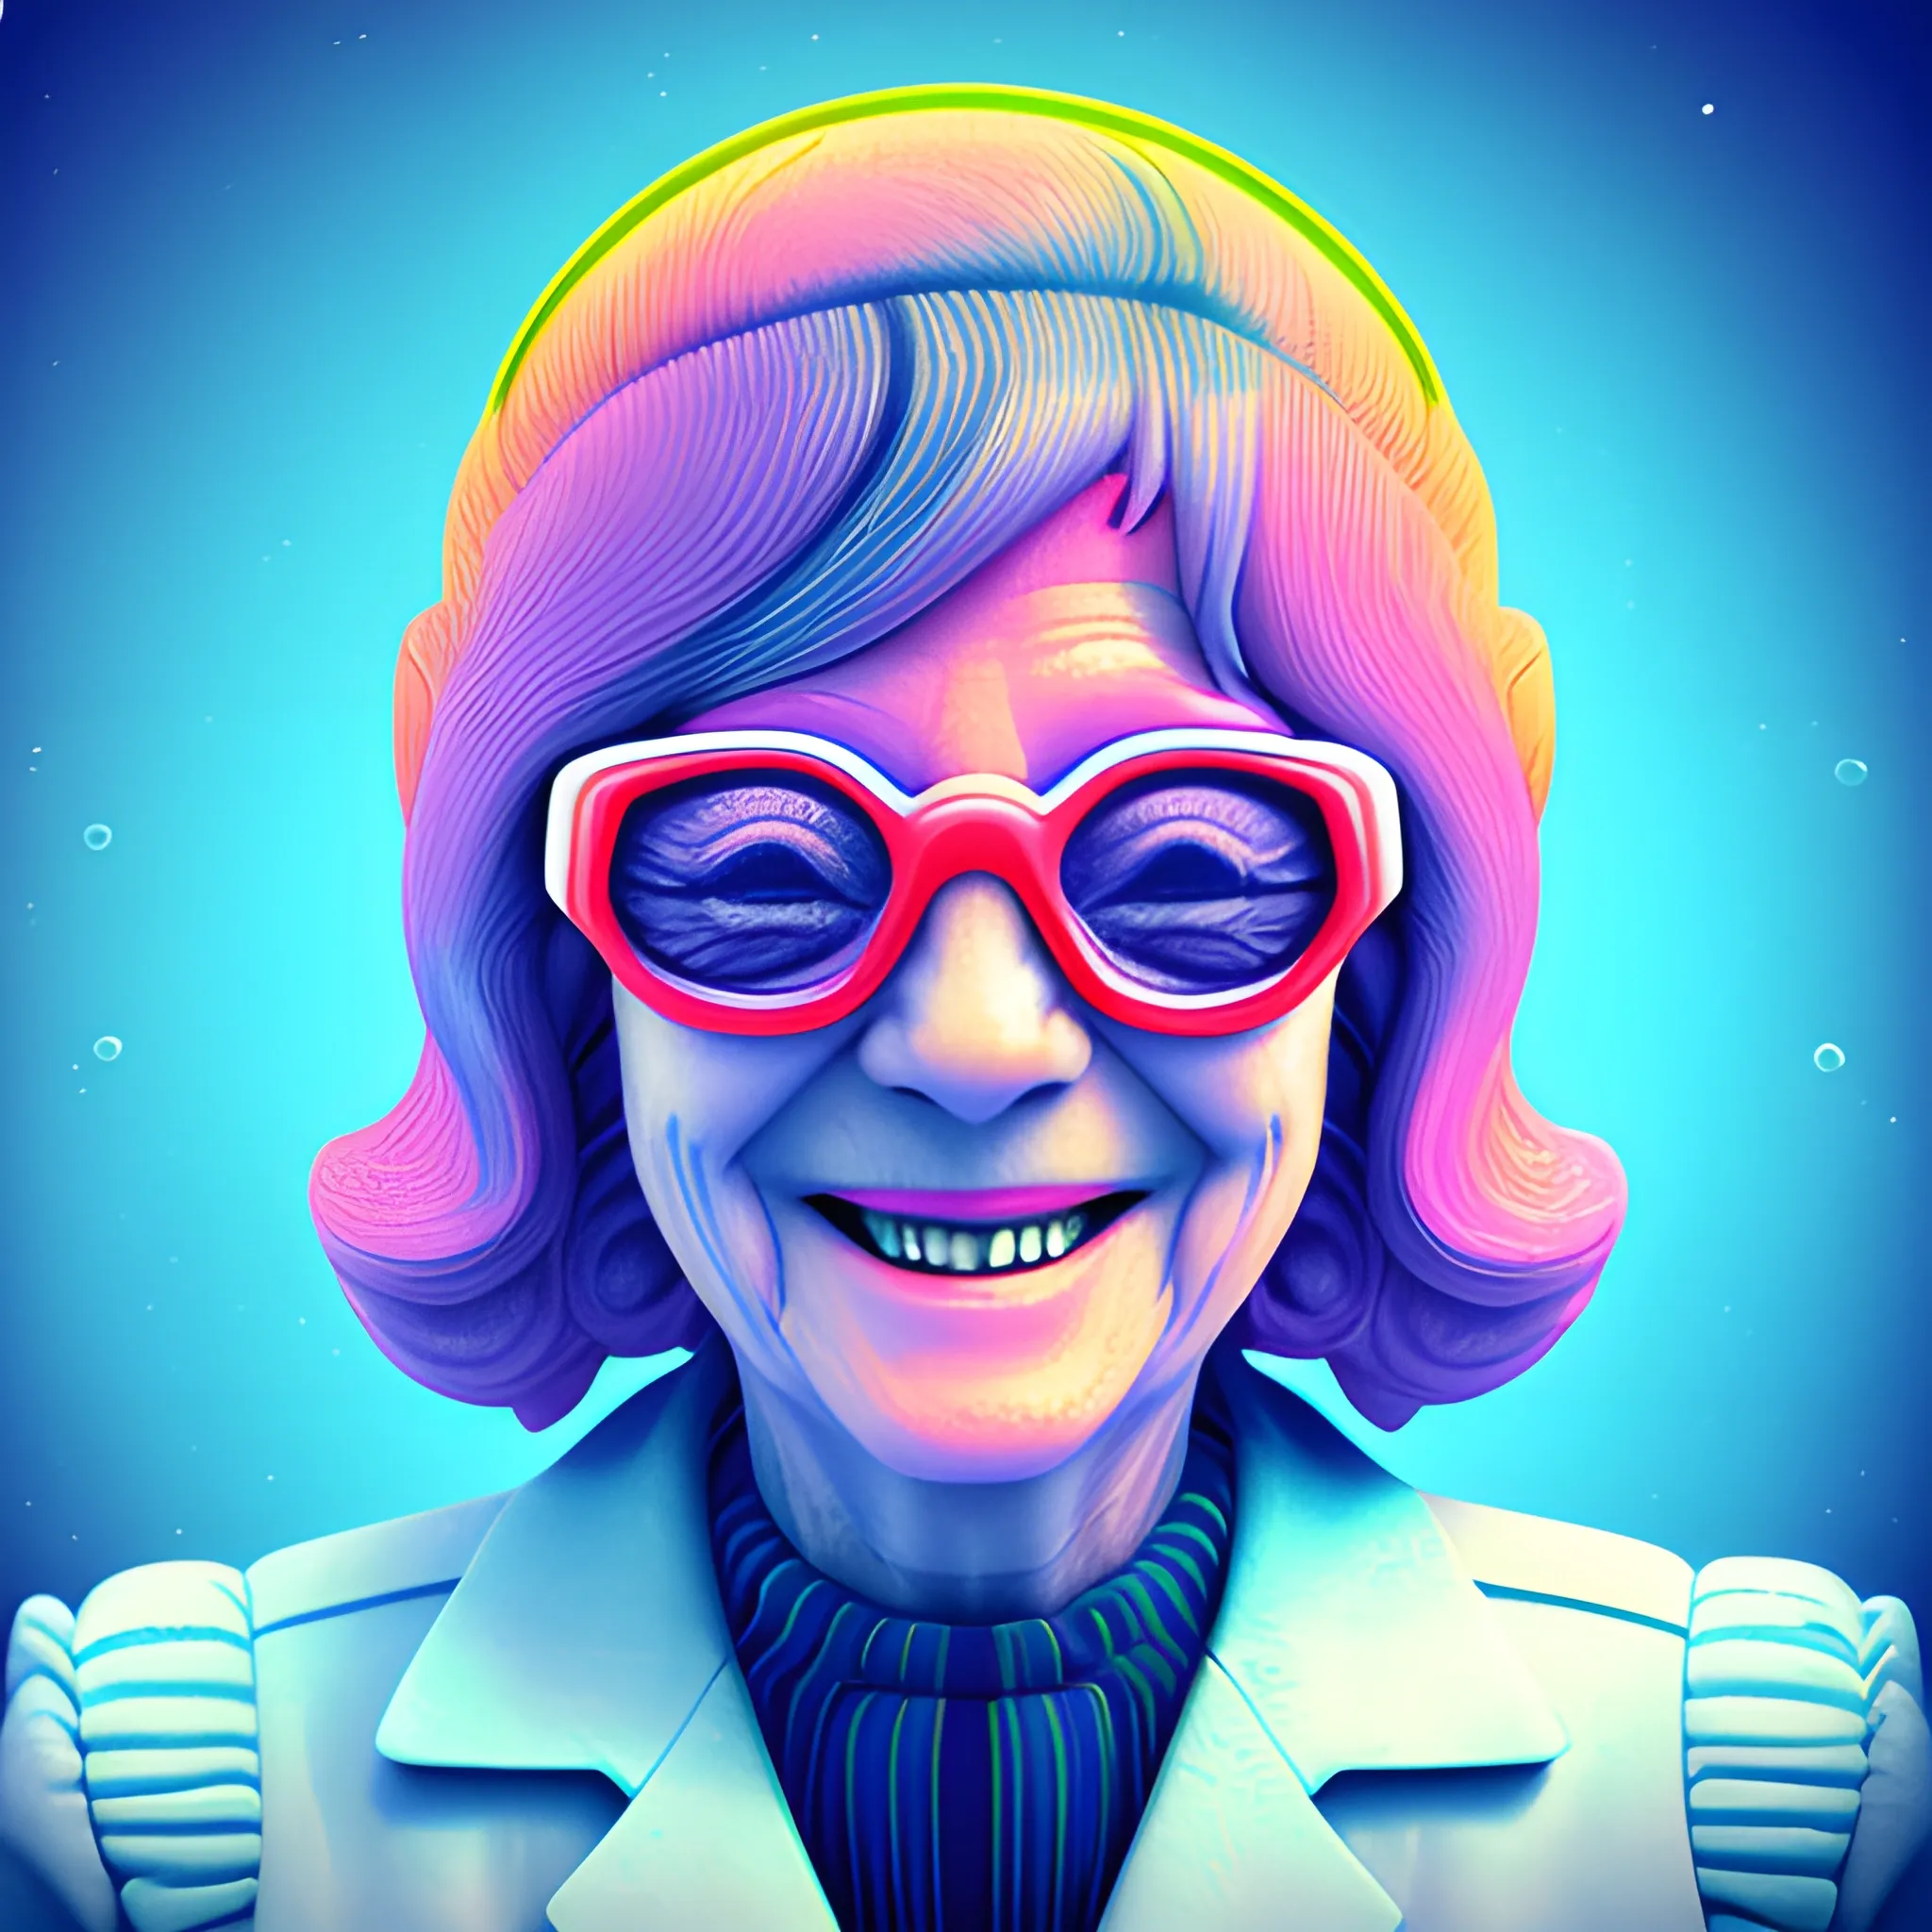 Friendly wise mature female government worker. Should be warm, cheerful, knowledgeable, and smiling.  underwater bubbly psychedelic clouds, Anaglyph 3D lens blur effect
